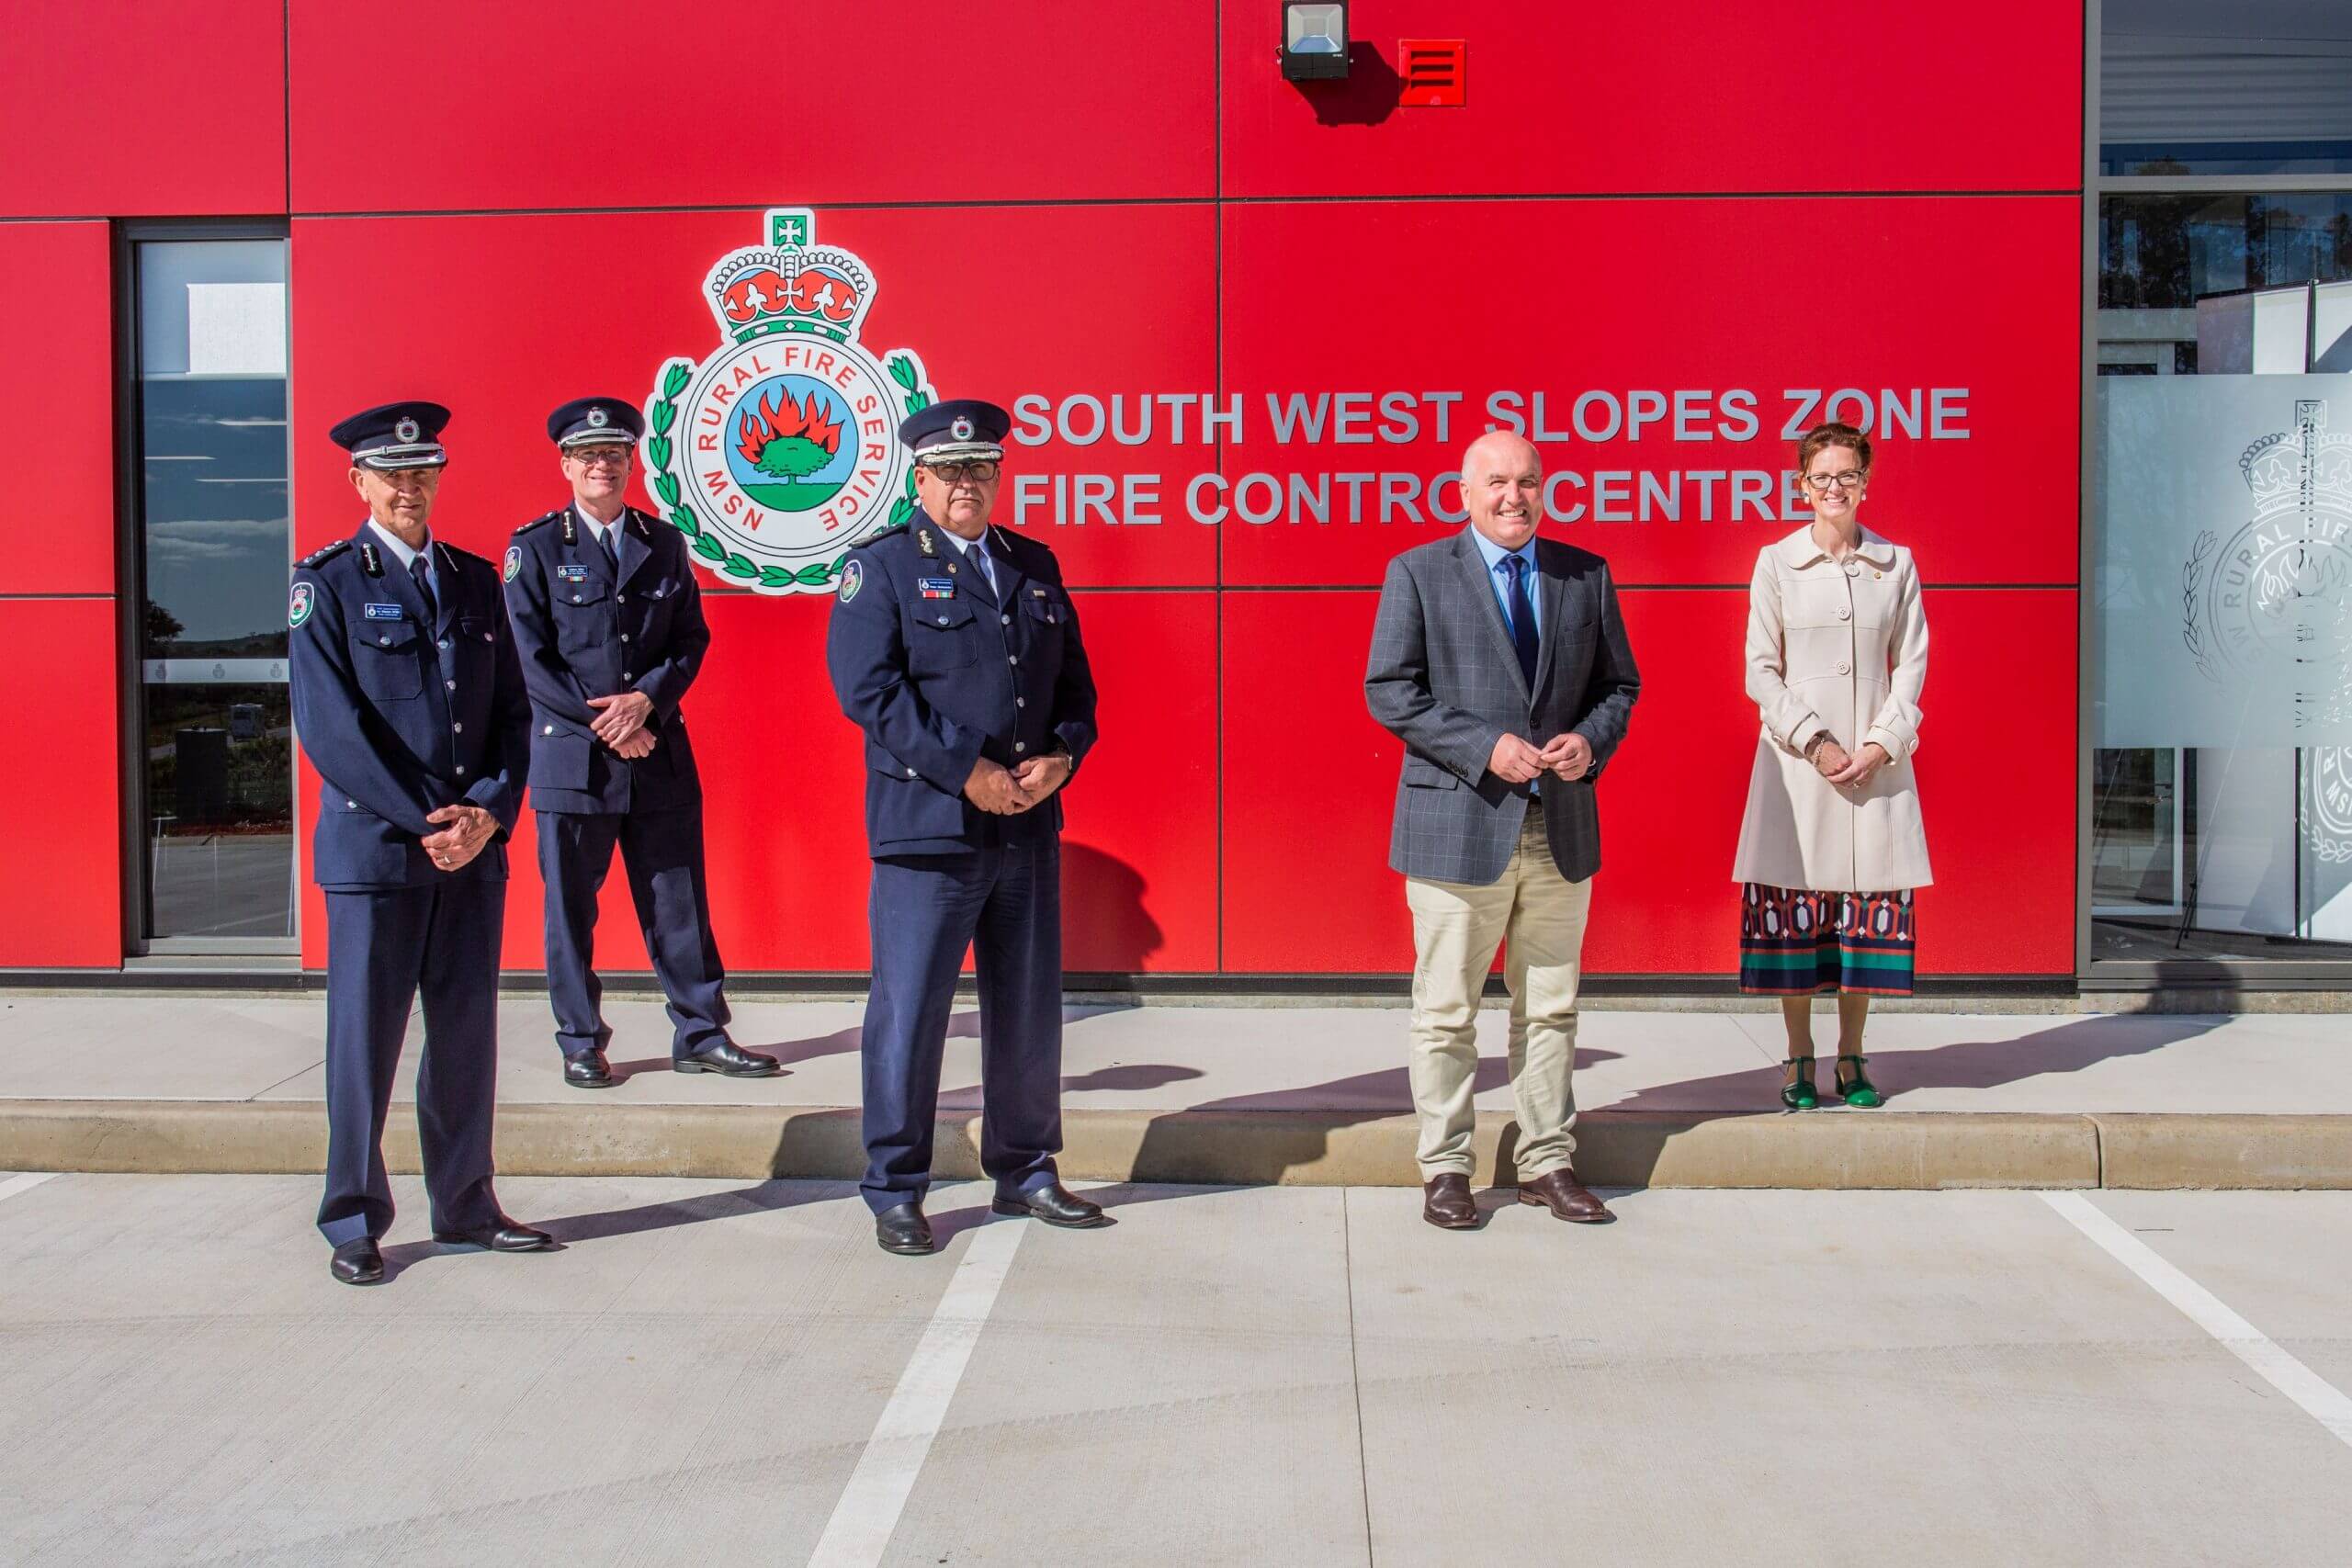 RFS Representatives, Minister Elliott and Steph Cooke stand in front of the bright red front of the fire control centre.